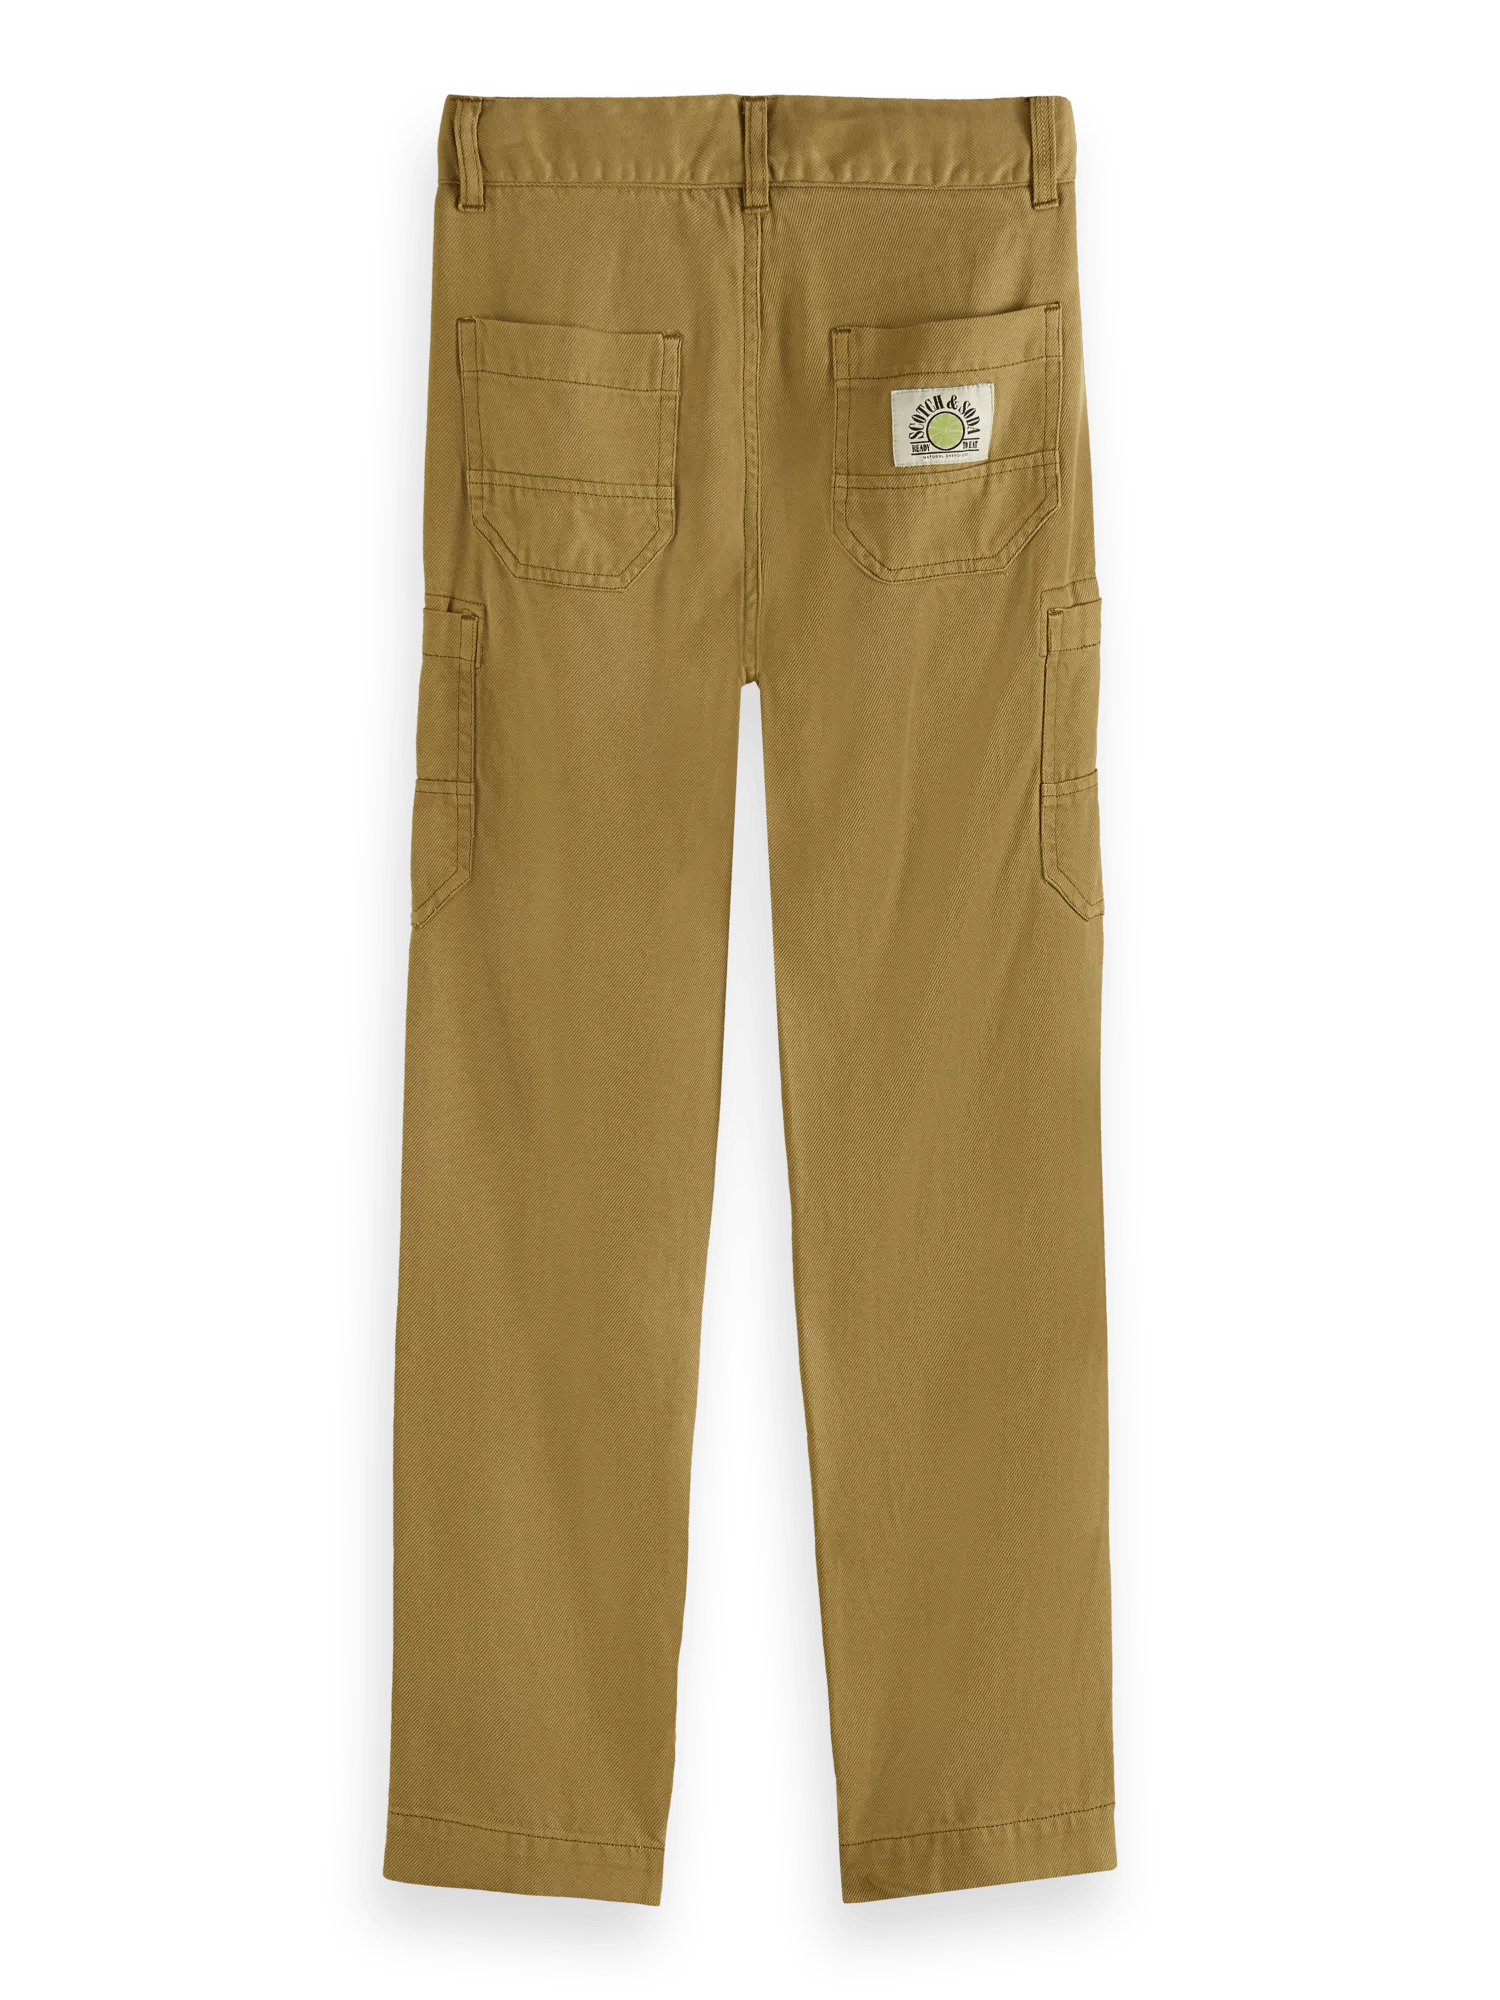 Scotch & Soda Relaxed slim fit - Garment-dyed Tencel cargo pants BCK